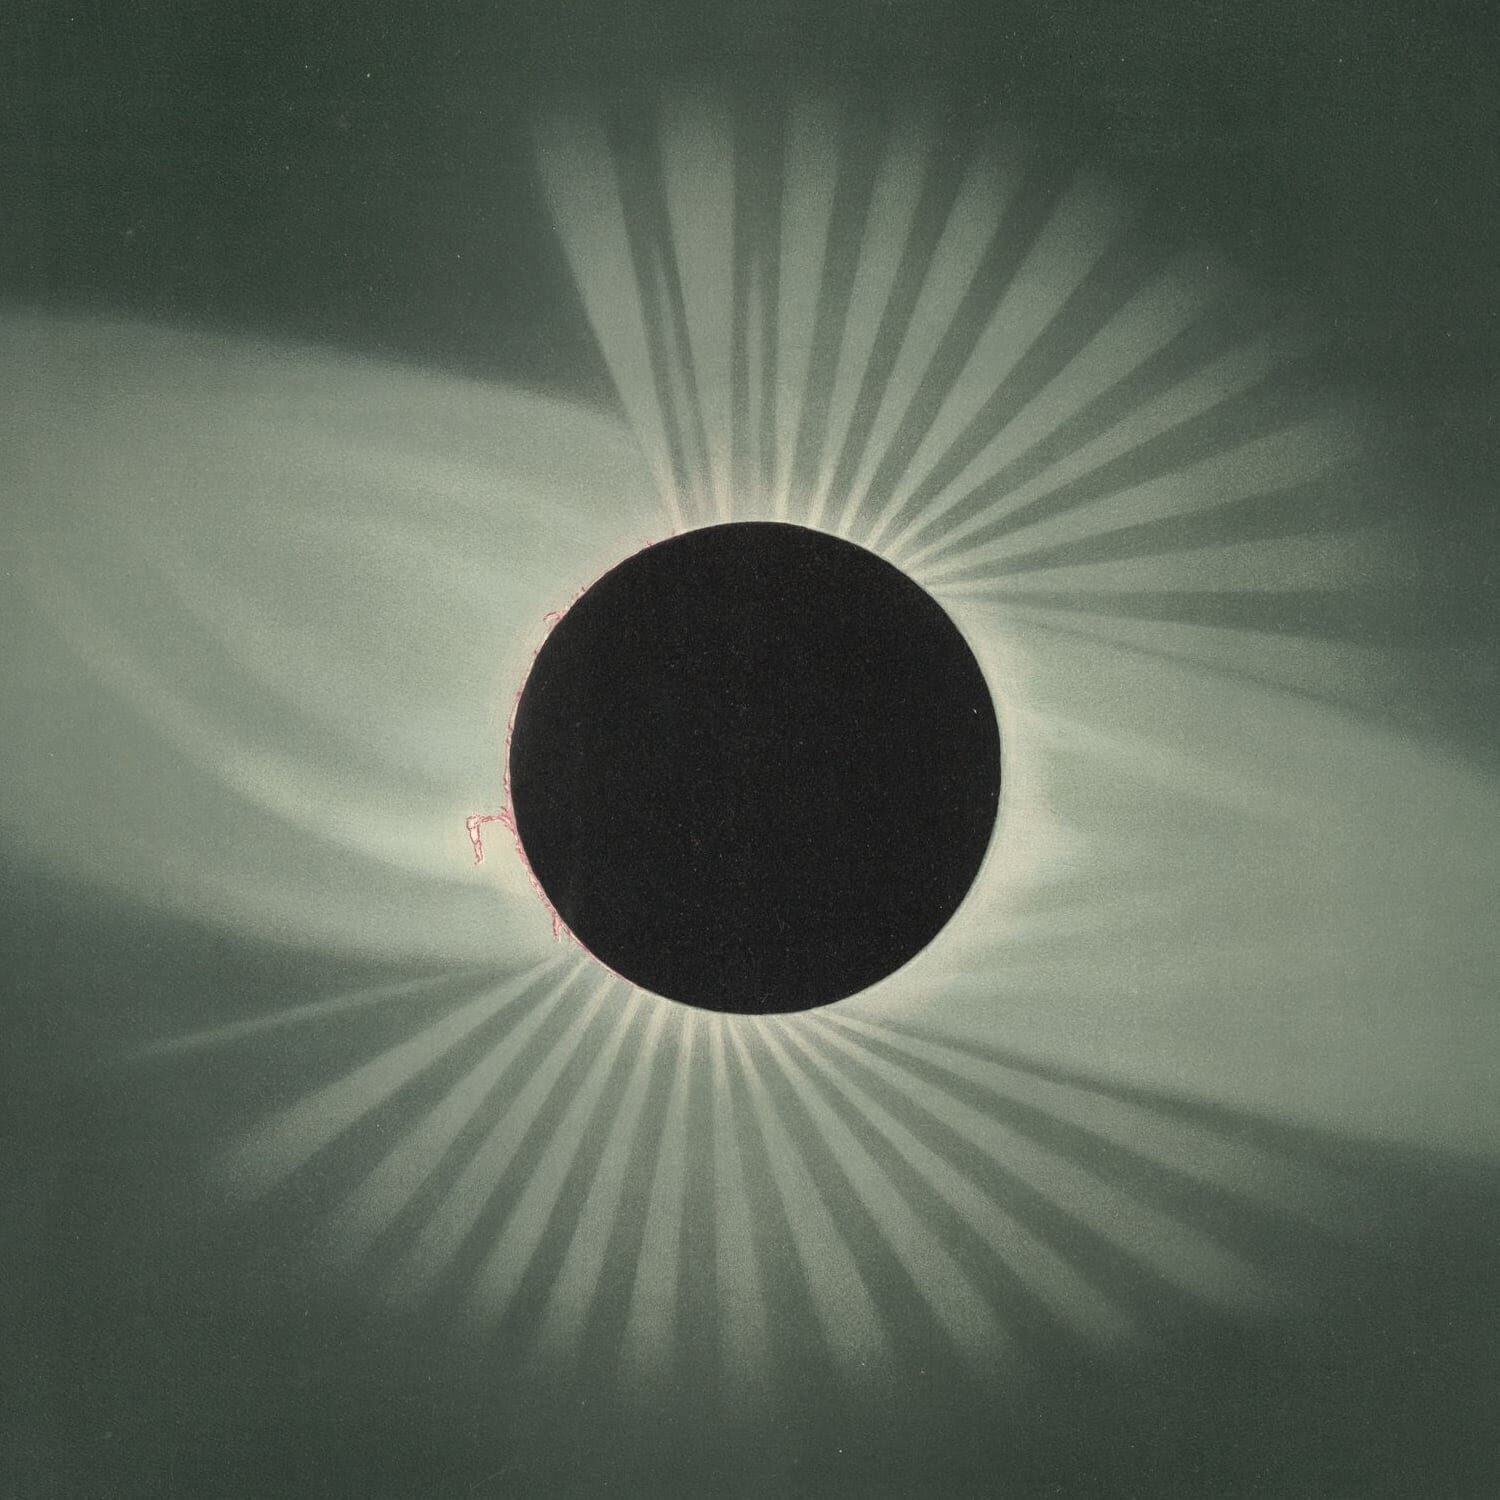 Total eclipse of the sun: Observed July 29, 1878, at Creston, Wyoming Territory. Trouvelot astronomical drawings, part of the New York Public Library’s digital collection.